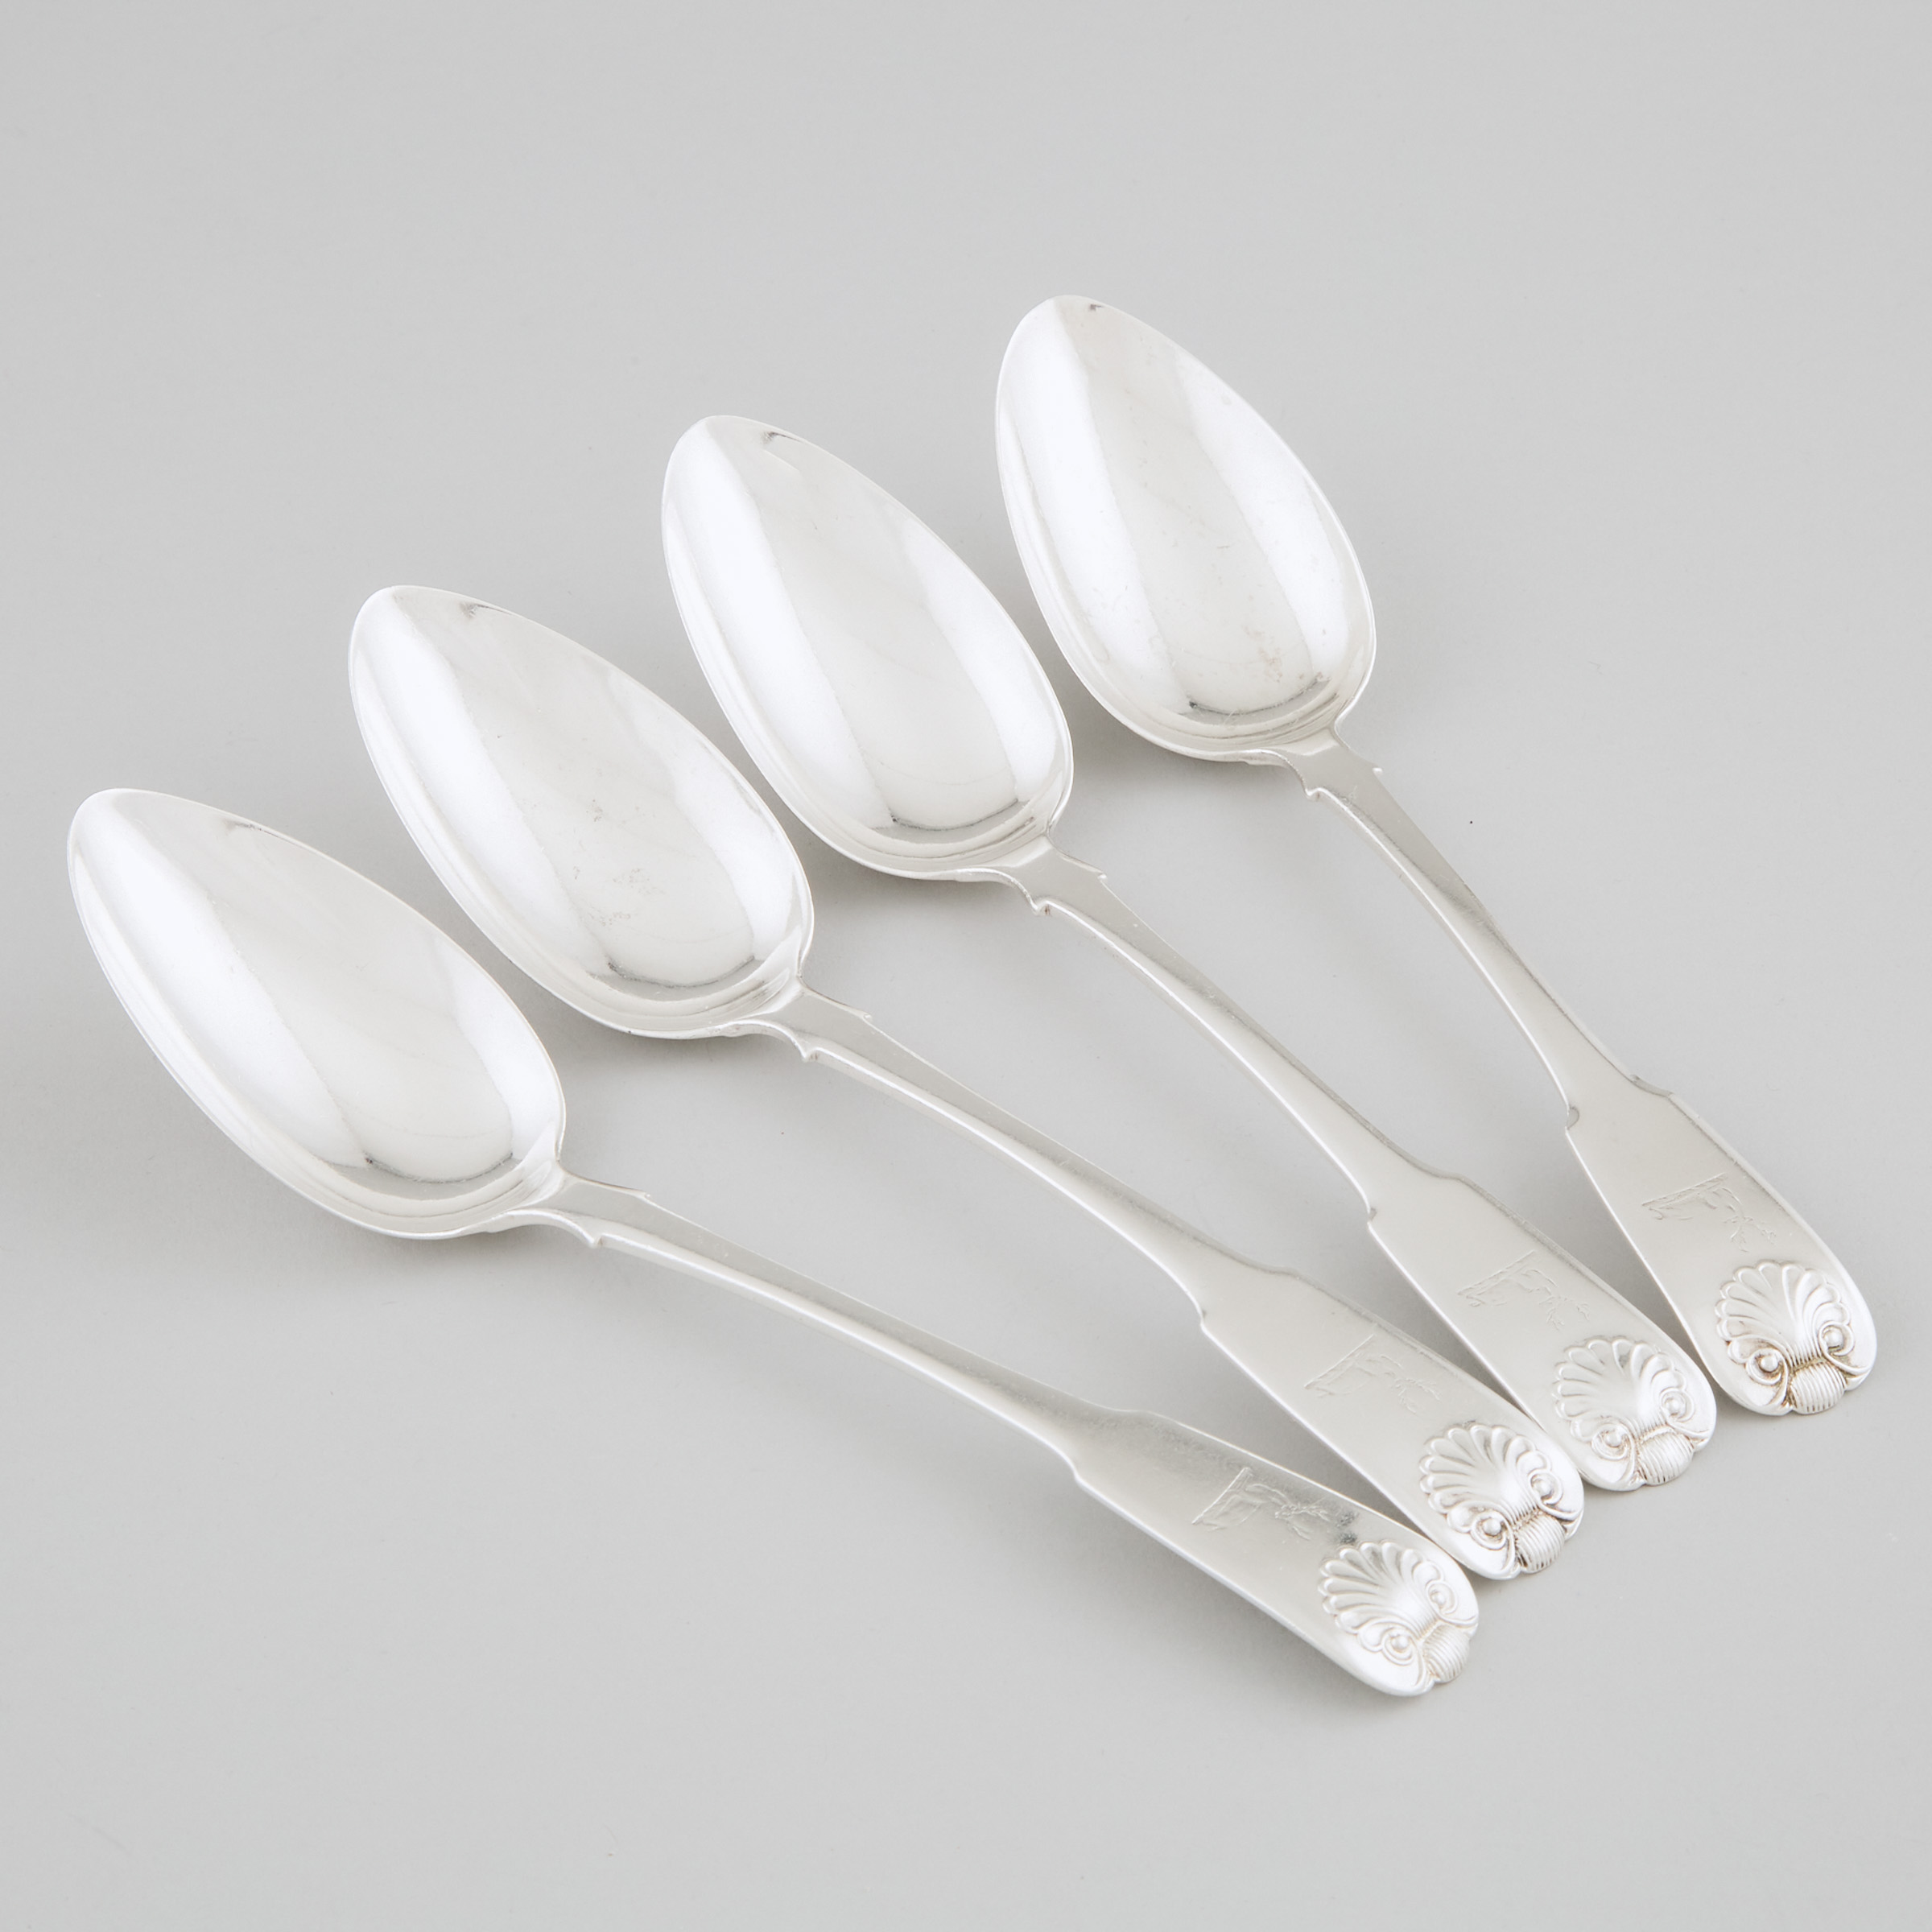 Four Canadian Silver Fiddle and Shell Pattern Table Spoons, Nelson Walker, Montreal, Que., c.1840